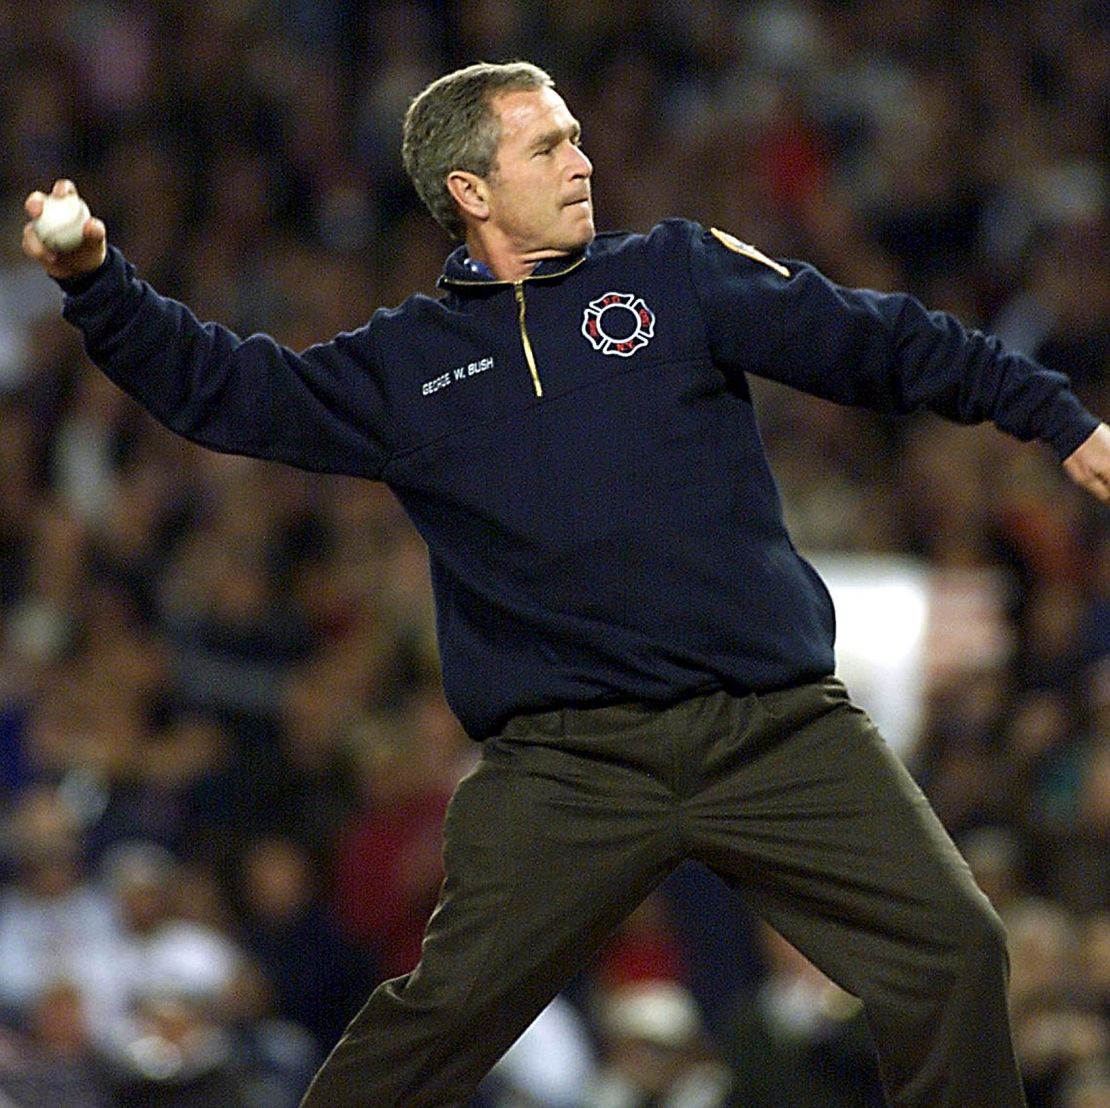 President George W. Bush throws the ceremonial first pitch of Game 3 of the World Series in New York's Yankee Stadium on October 30, 2001.